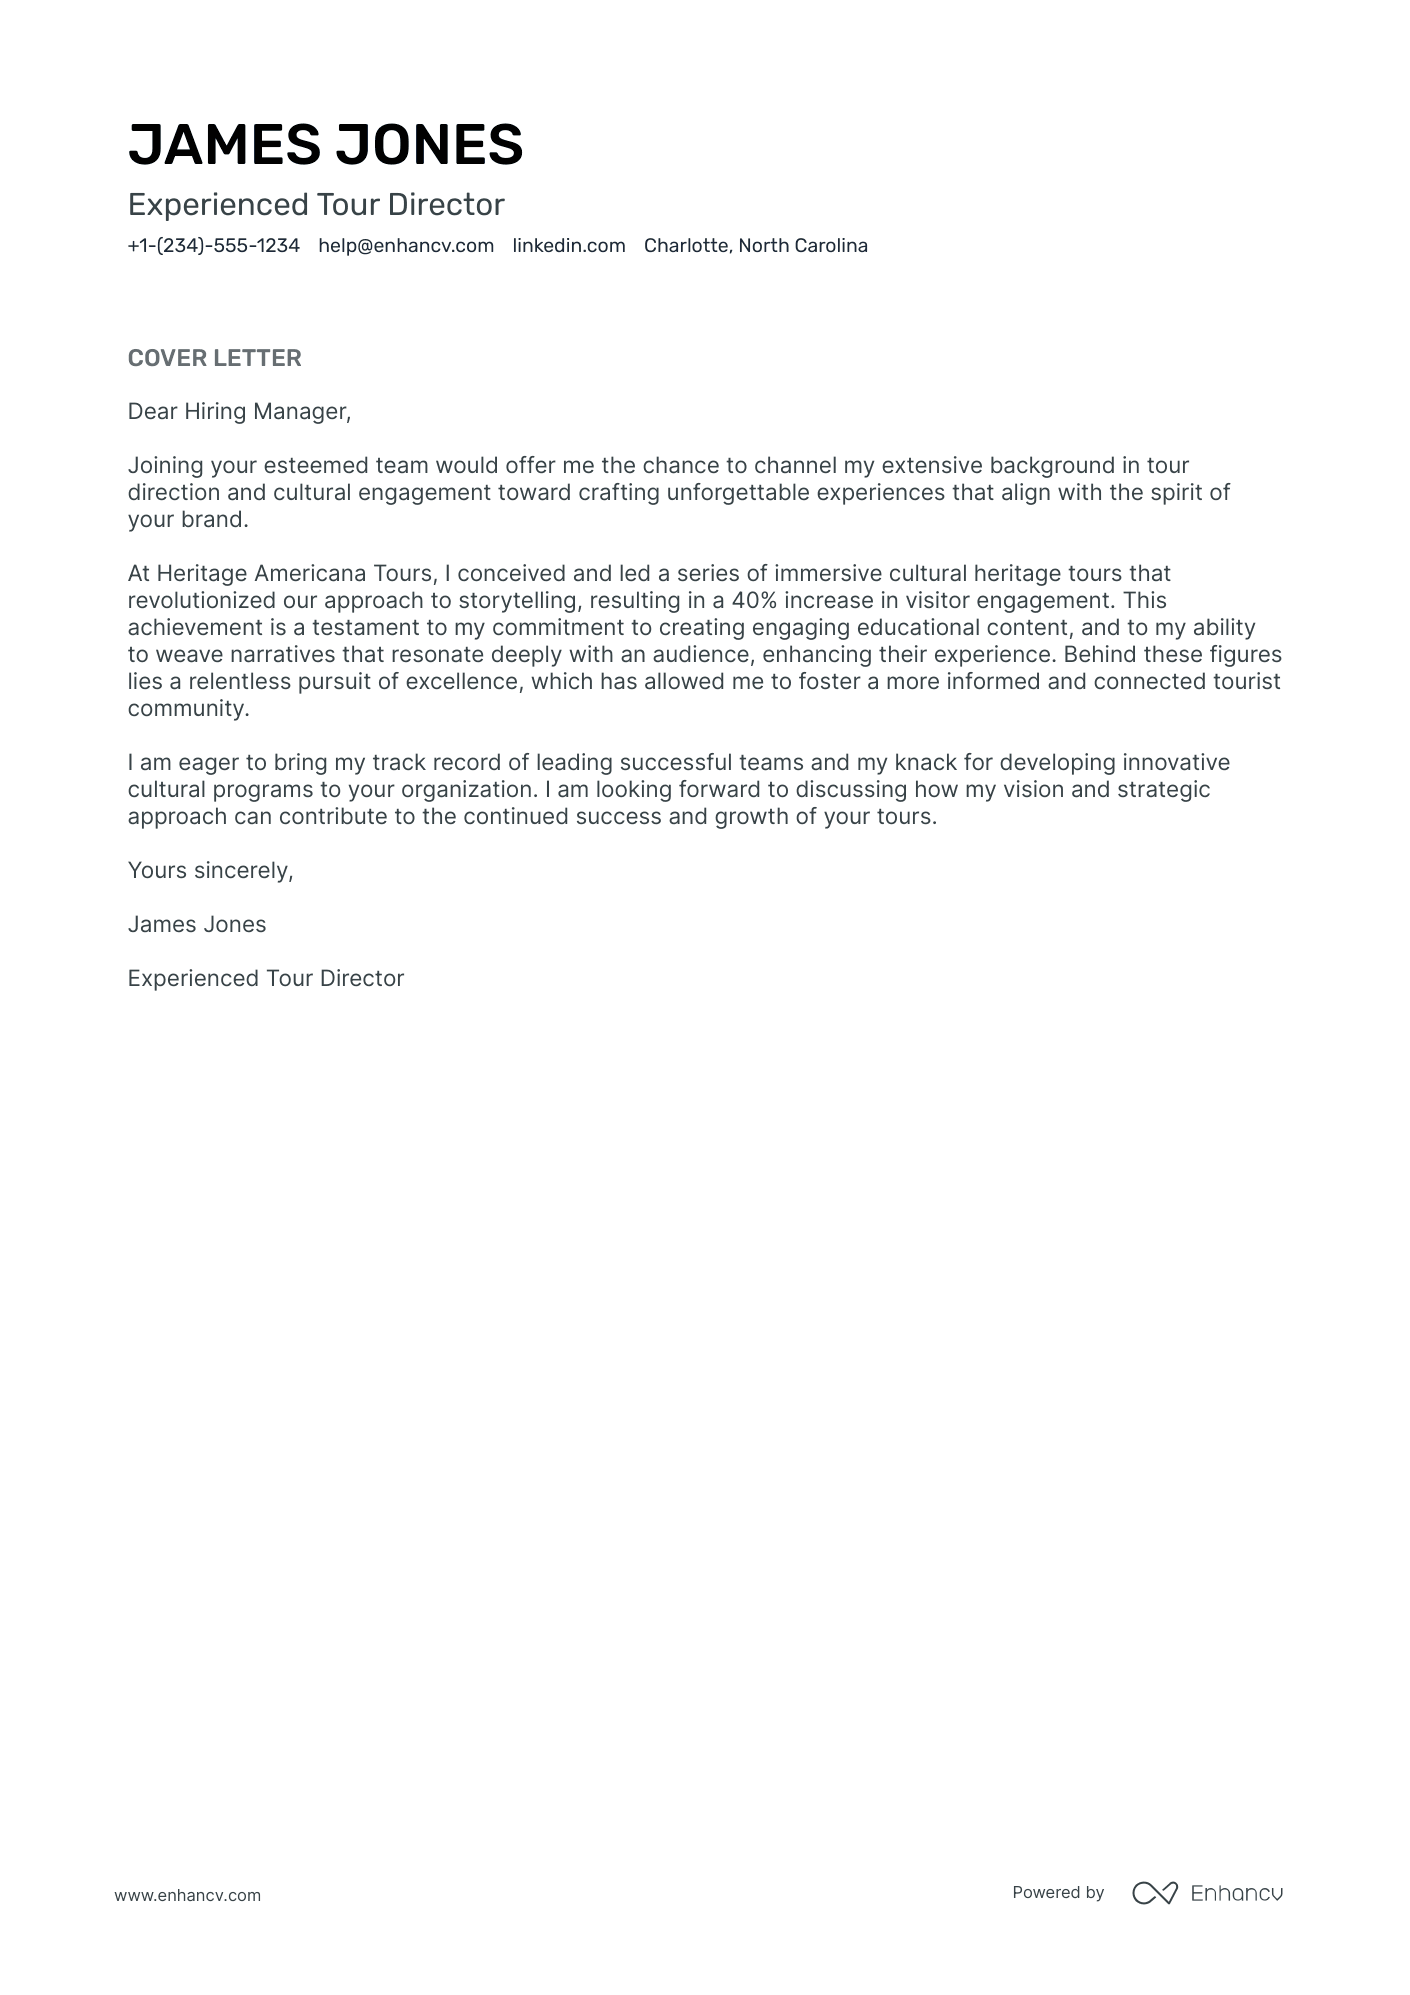 Tour Director cover letter